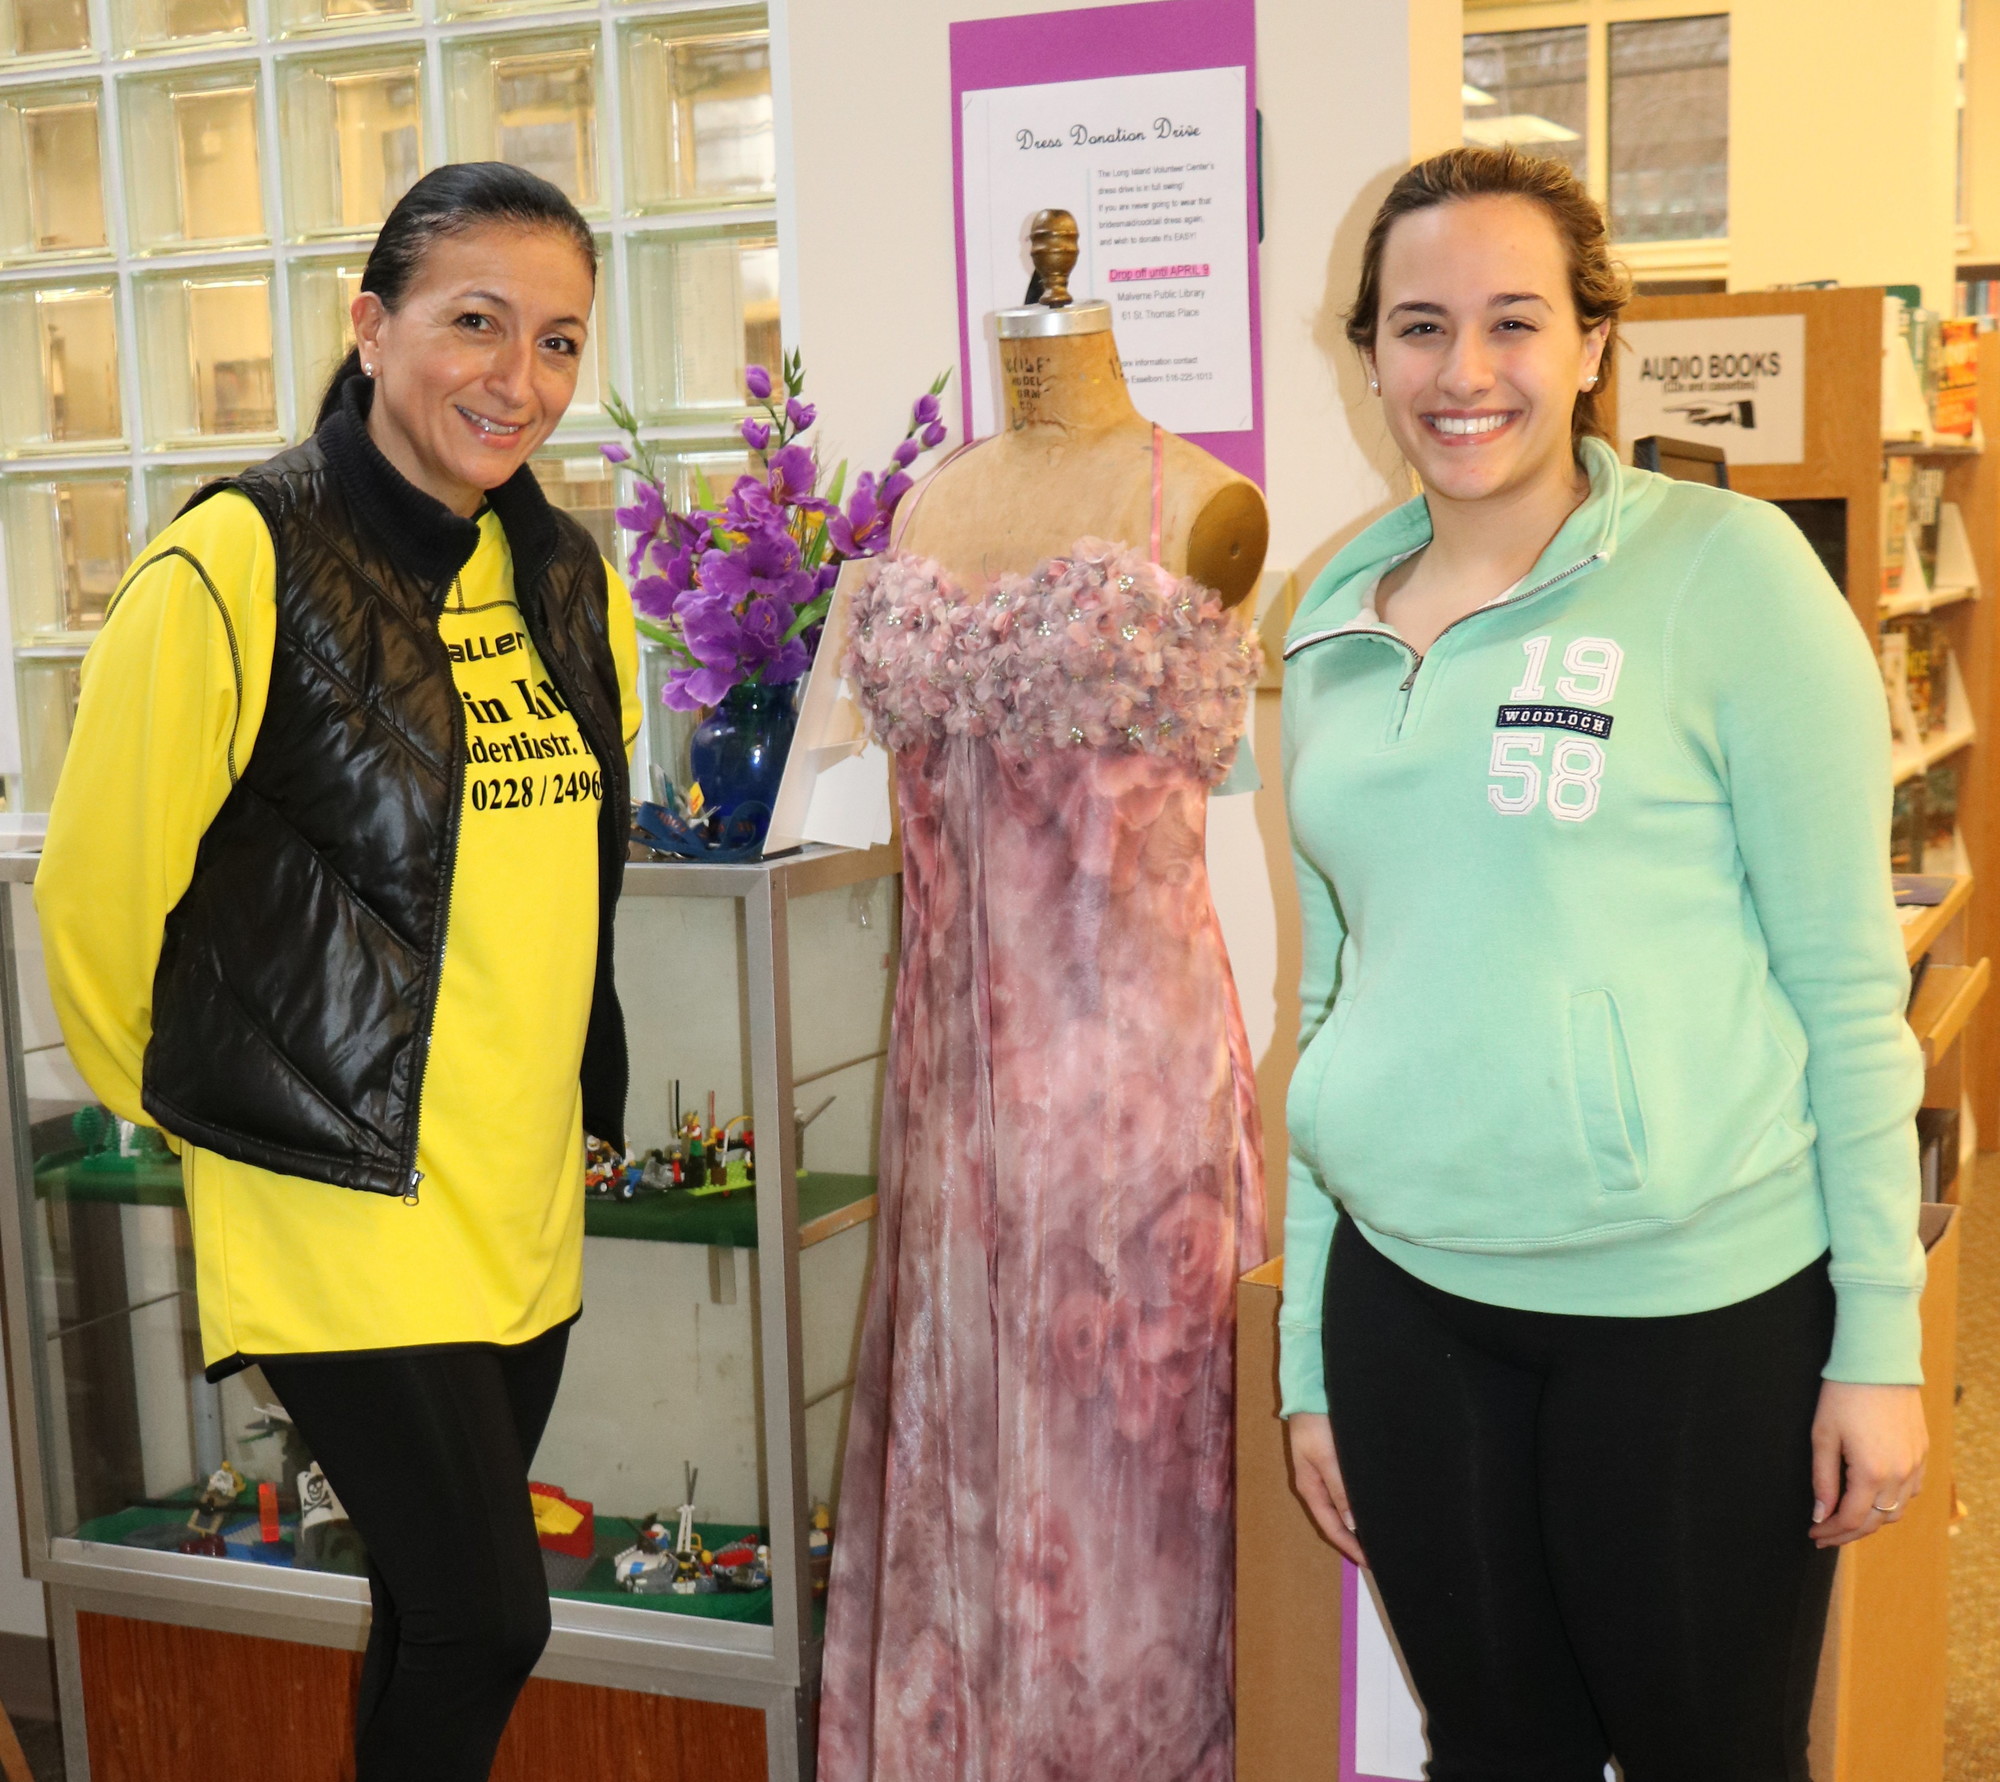 Malvernites Maria Hafker, left, and Victoria Marmo discovered the prom dress drop off site during their trip to the library last week.